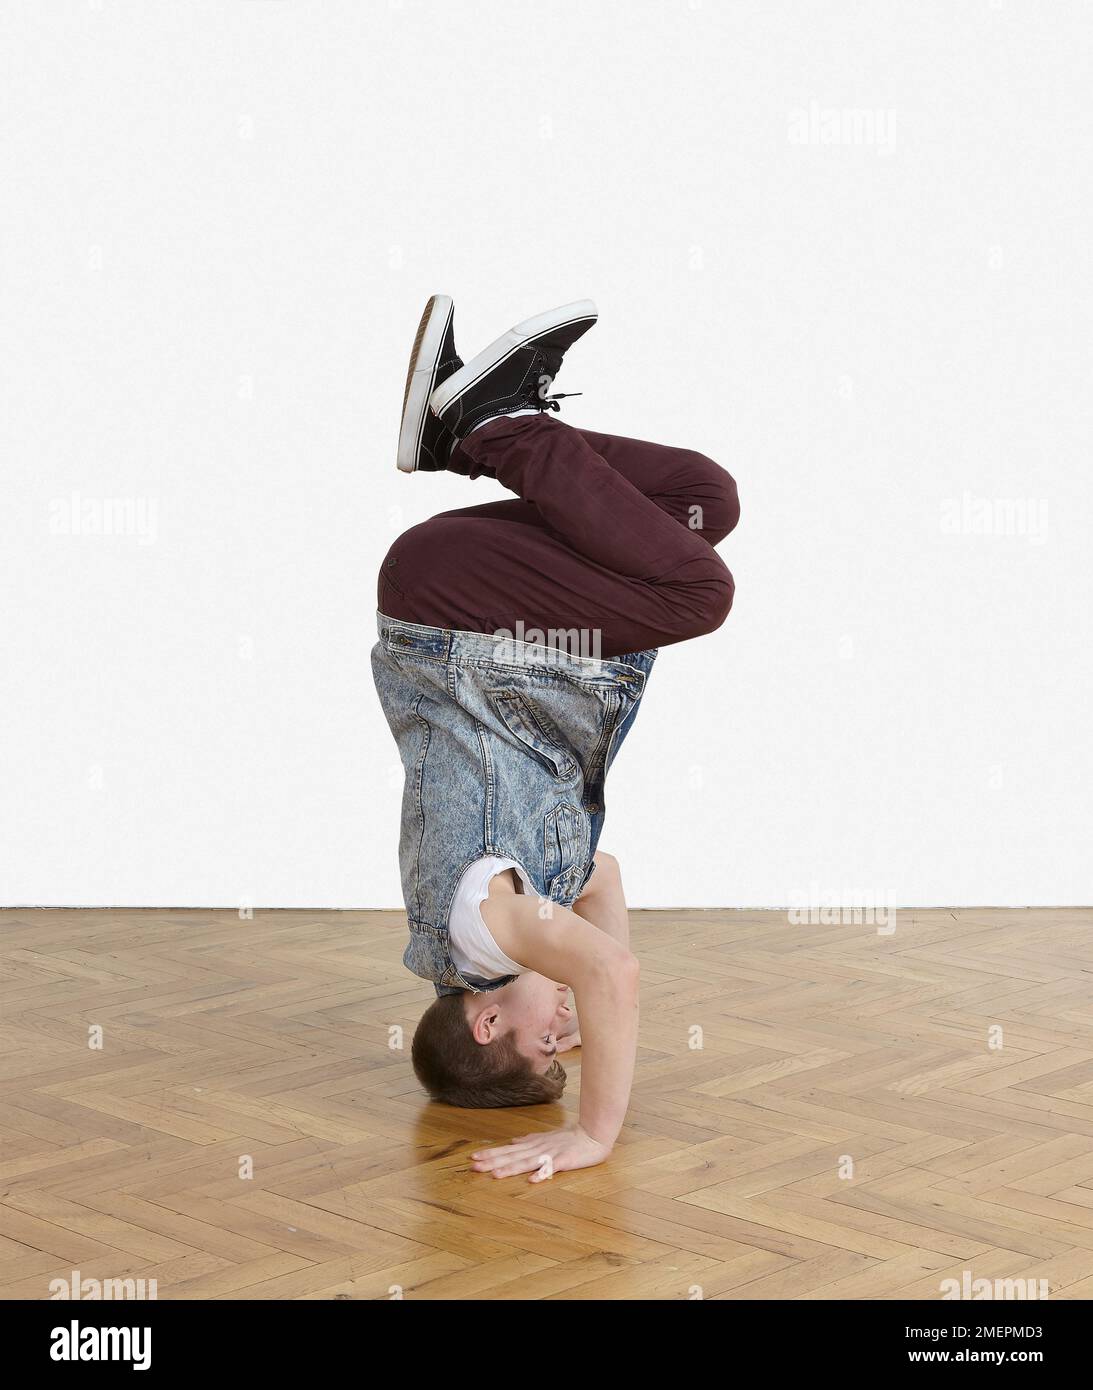 Teenager performing breakdance moves Stock Photo